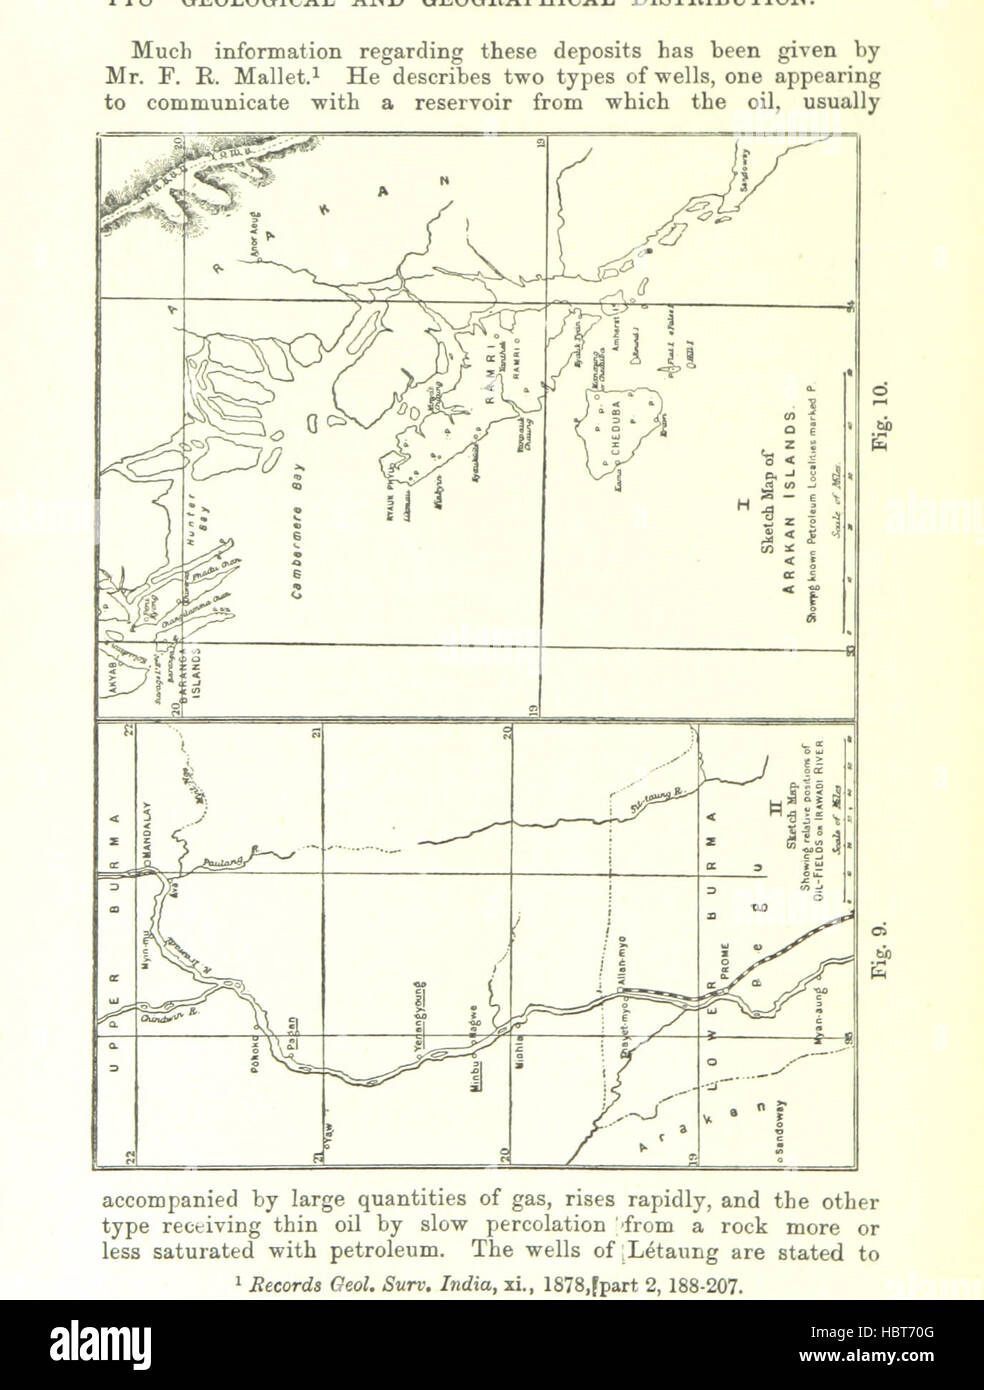 Image taken from page 168 of 'Petroleum: a treatise on the geographical distribution and geological occurrence of petroleum and natural gas ... By B. Redwood, assisted by G. T. Holloway, and other contributors ... With maps, etc' Image taken from page 168 of 'Petroleum a treatise on Stock Photo